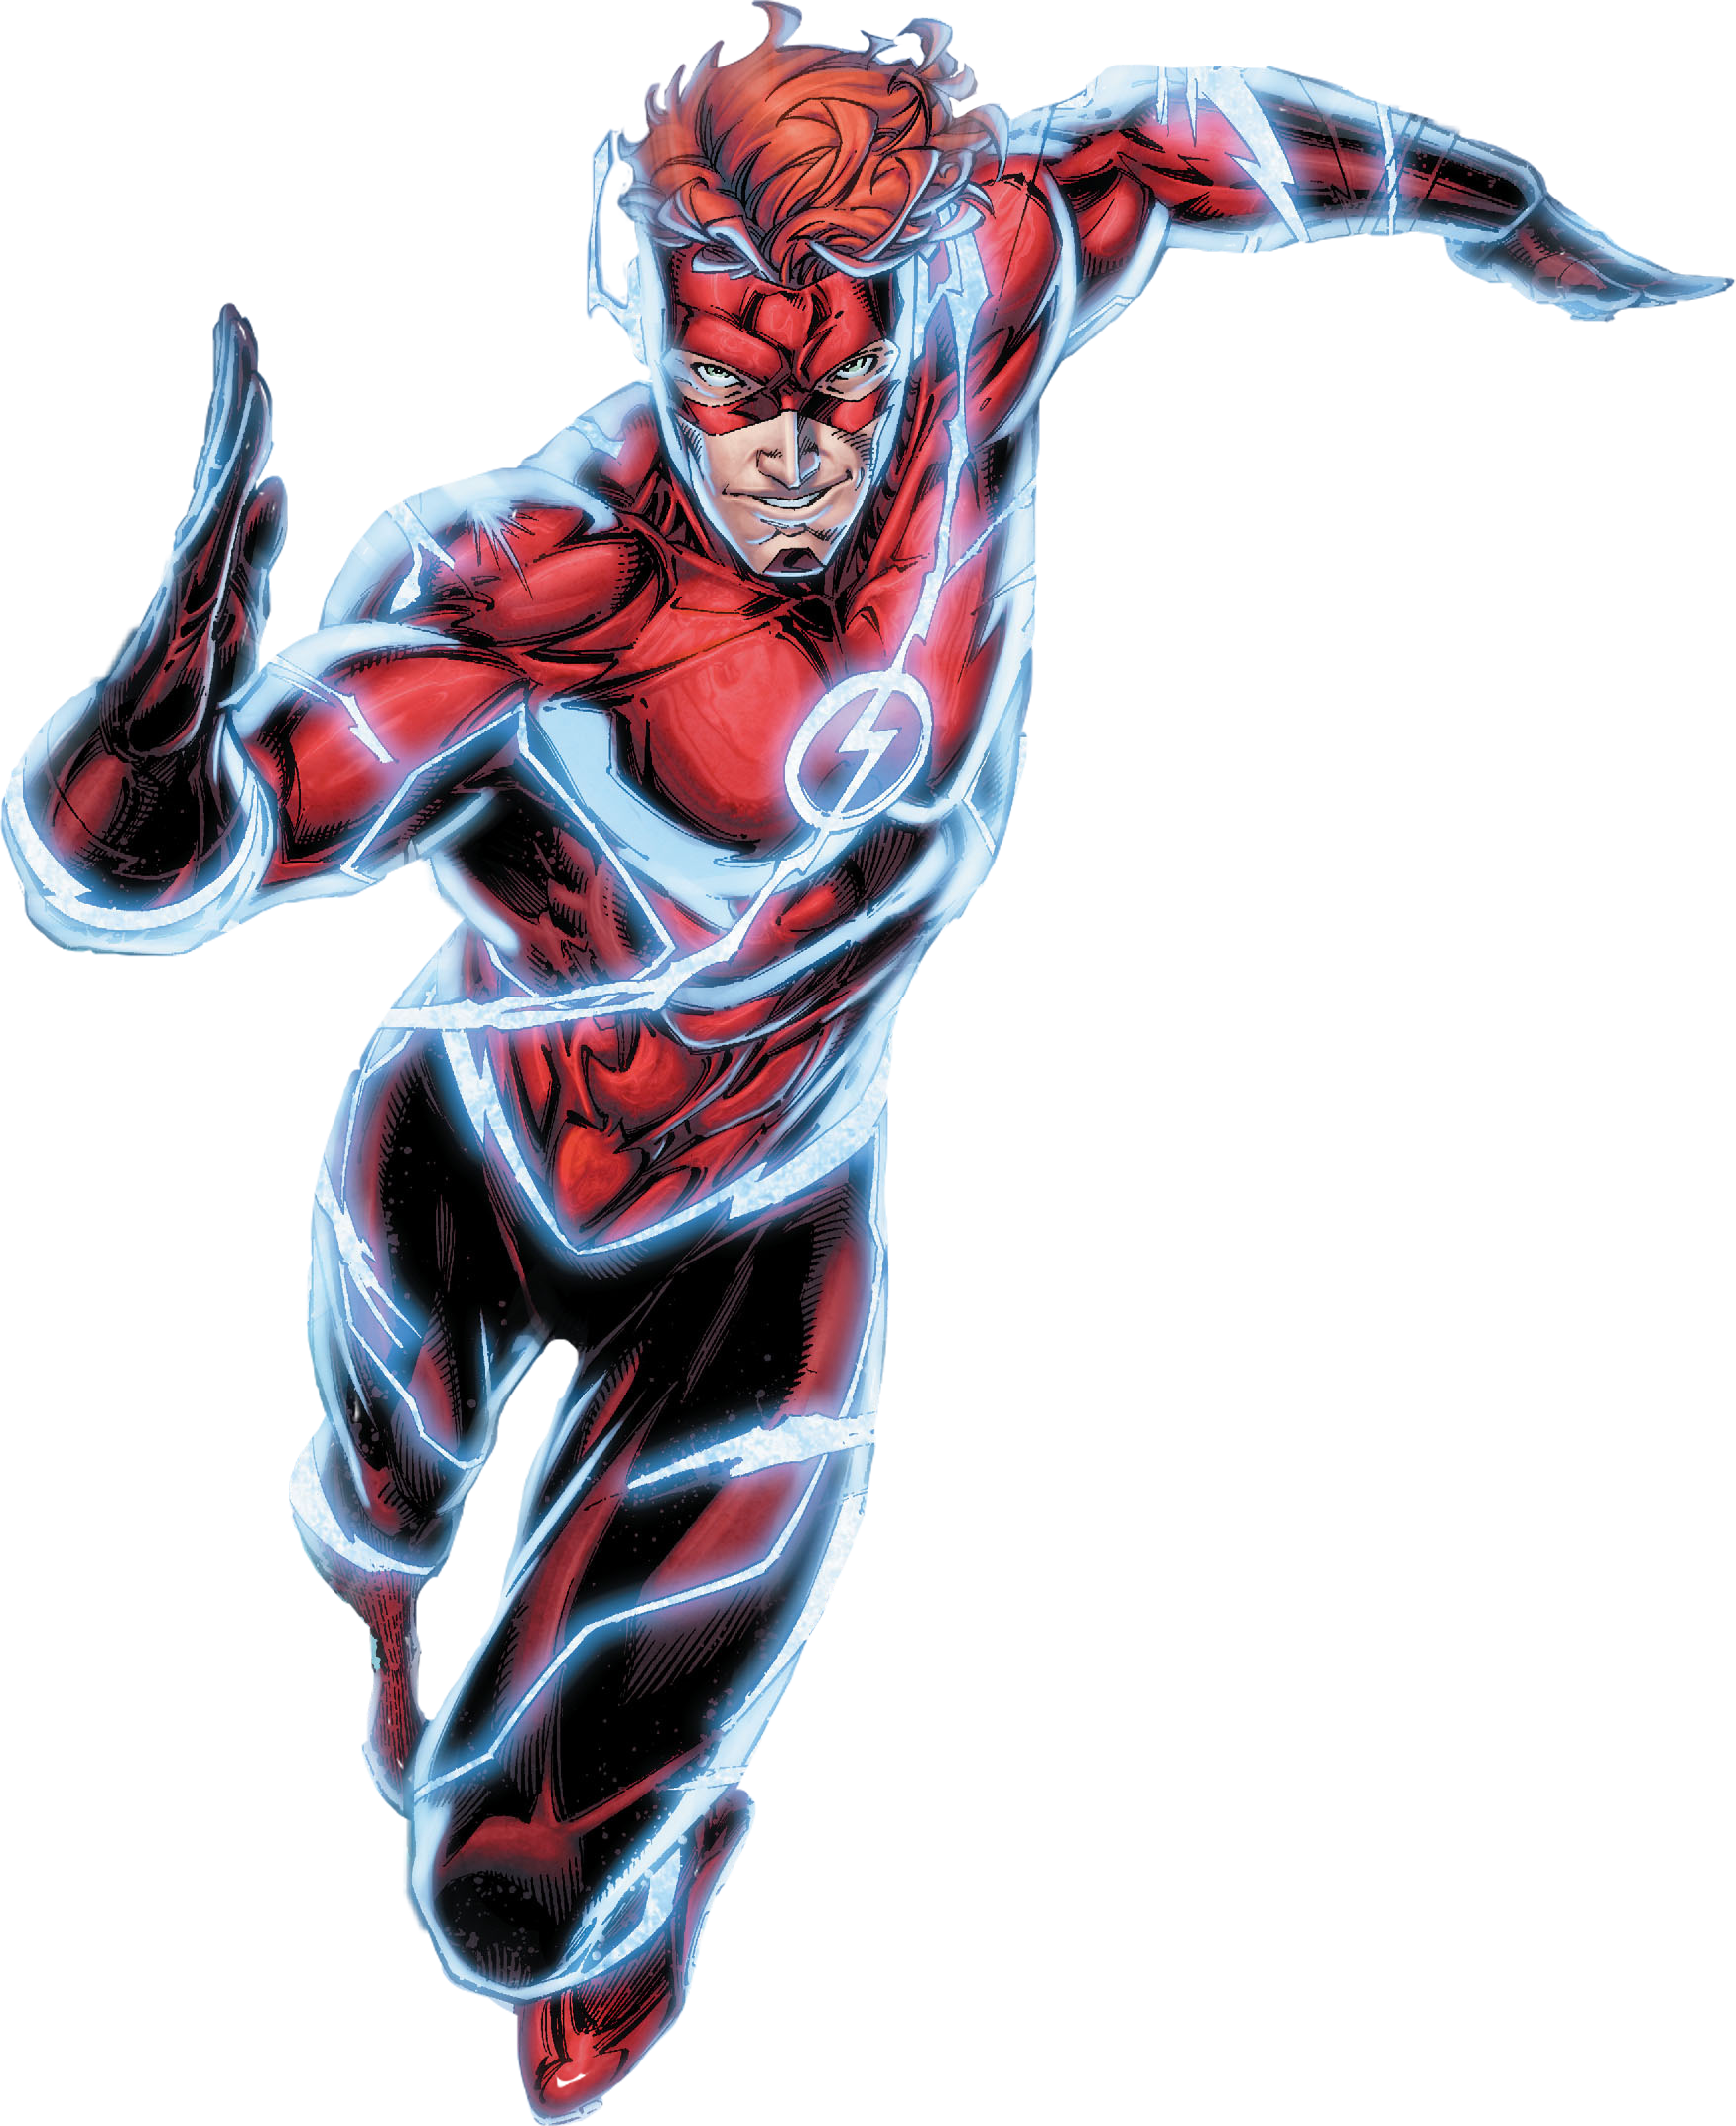 wally west actor